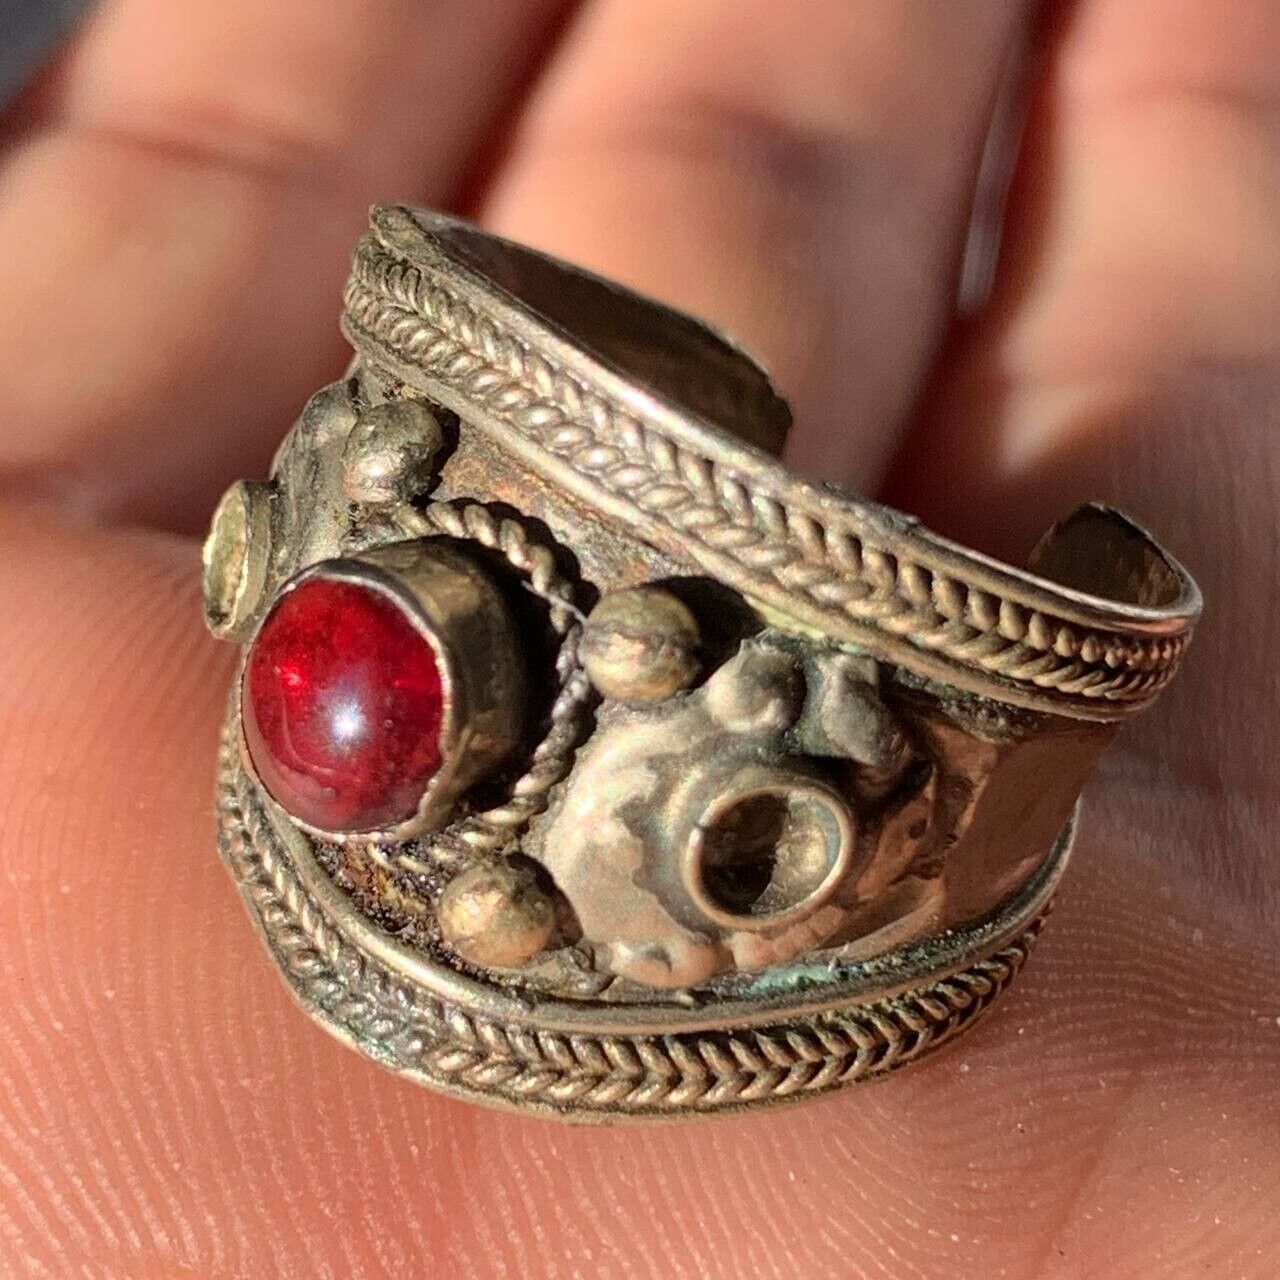 EXTREMELY RARE ROMAN BRONZE ANTIQUE RING RED STONE ANCIENT ENGRAVING ARTIFACT